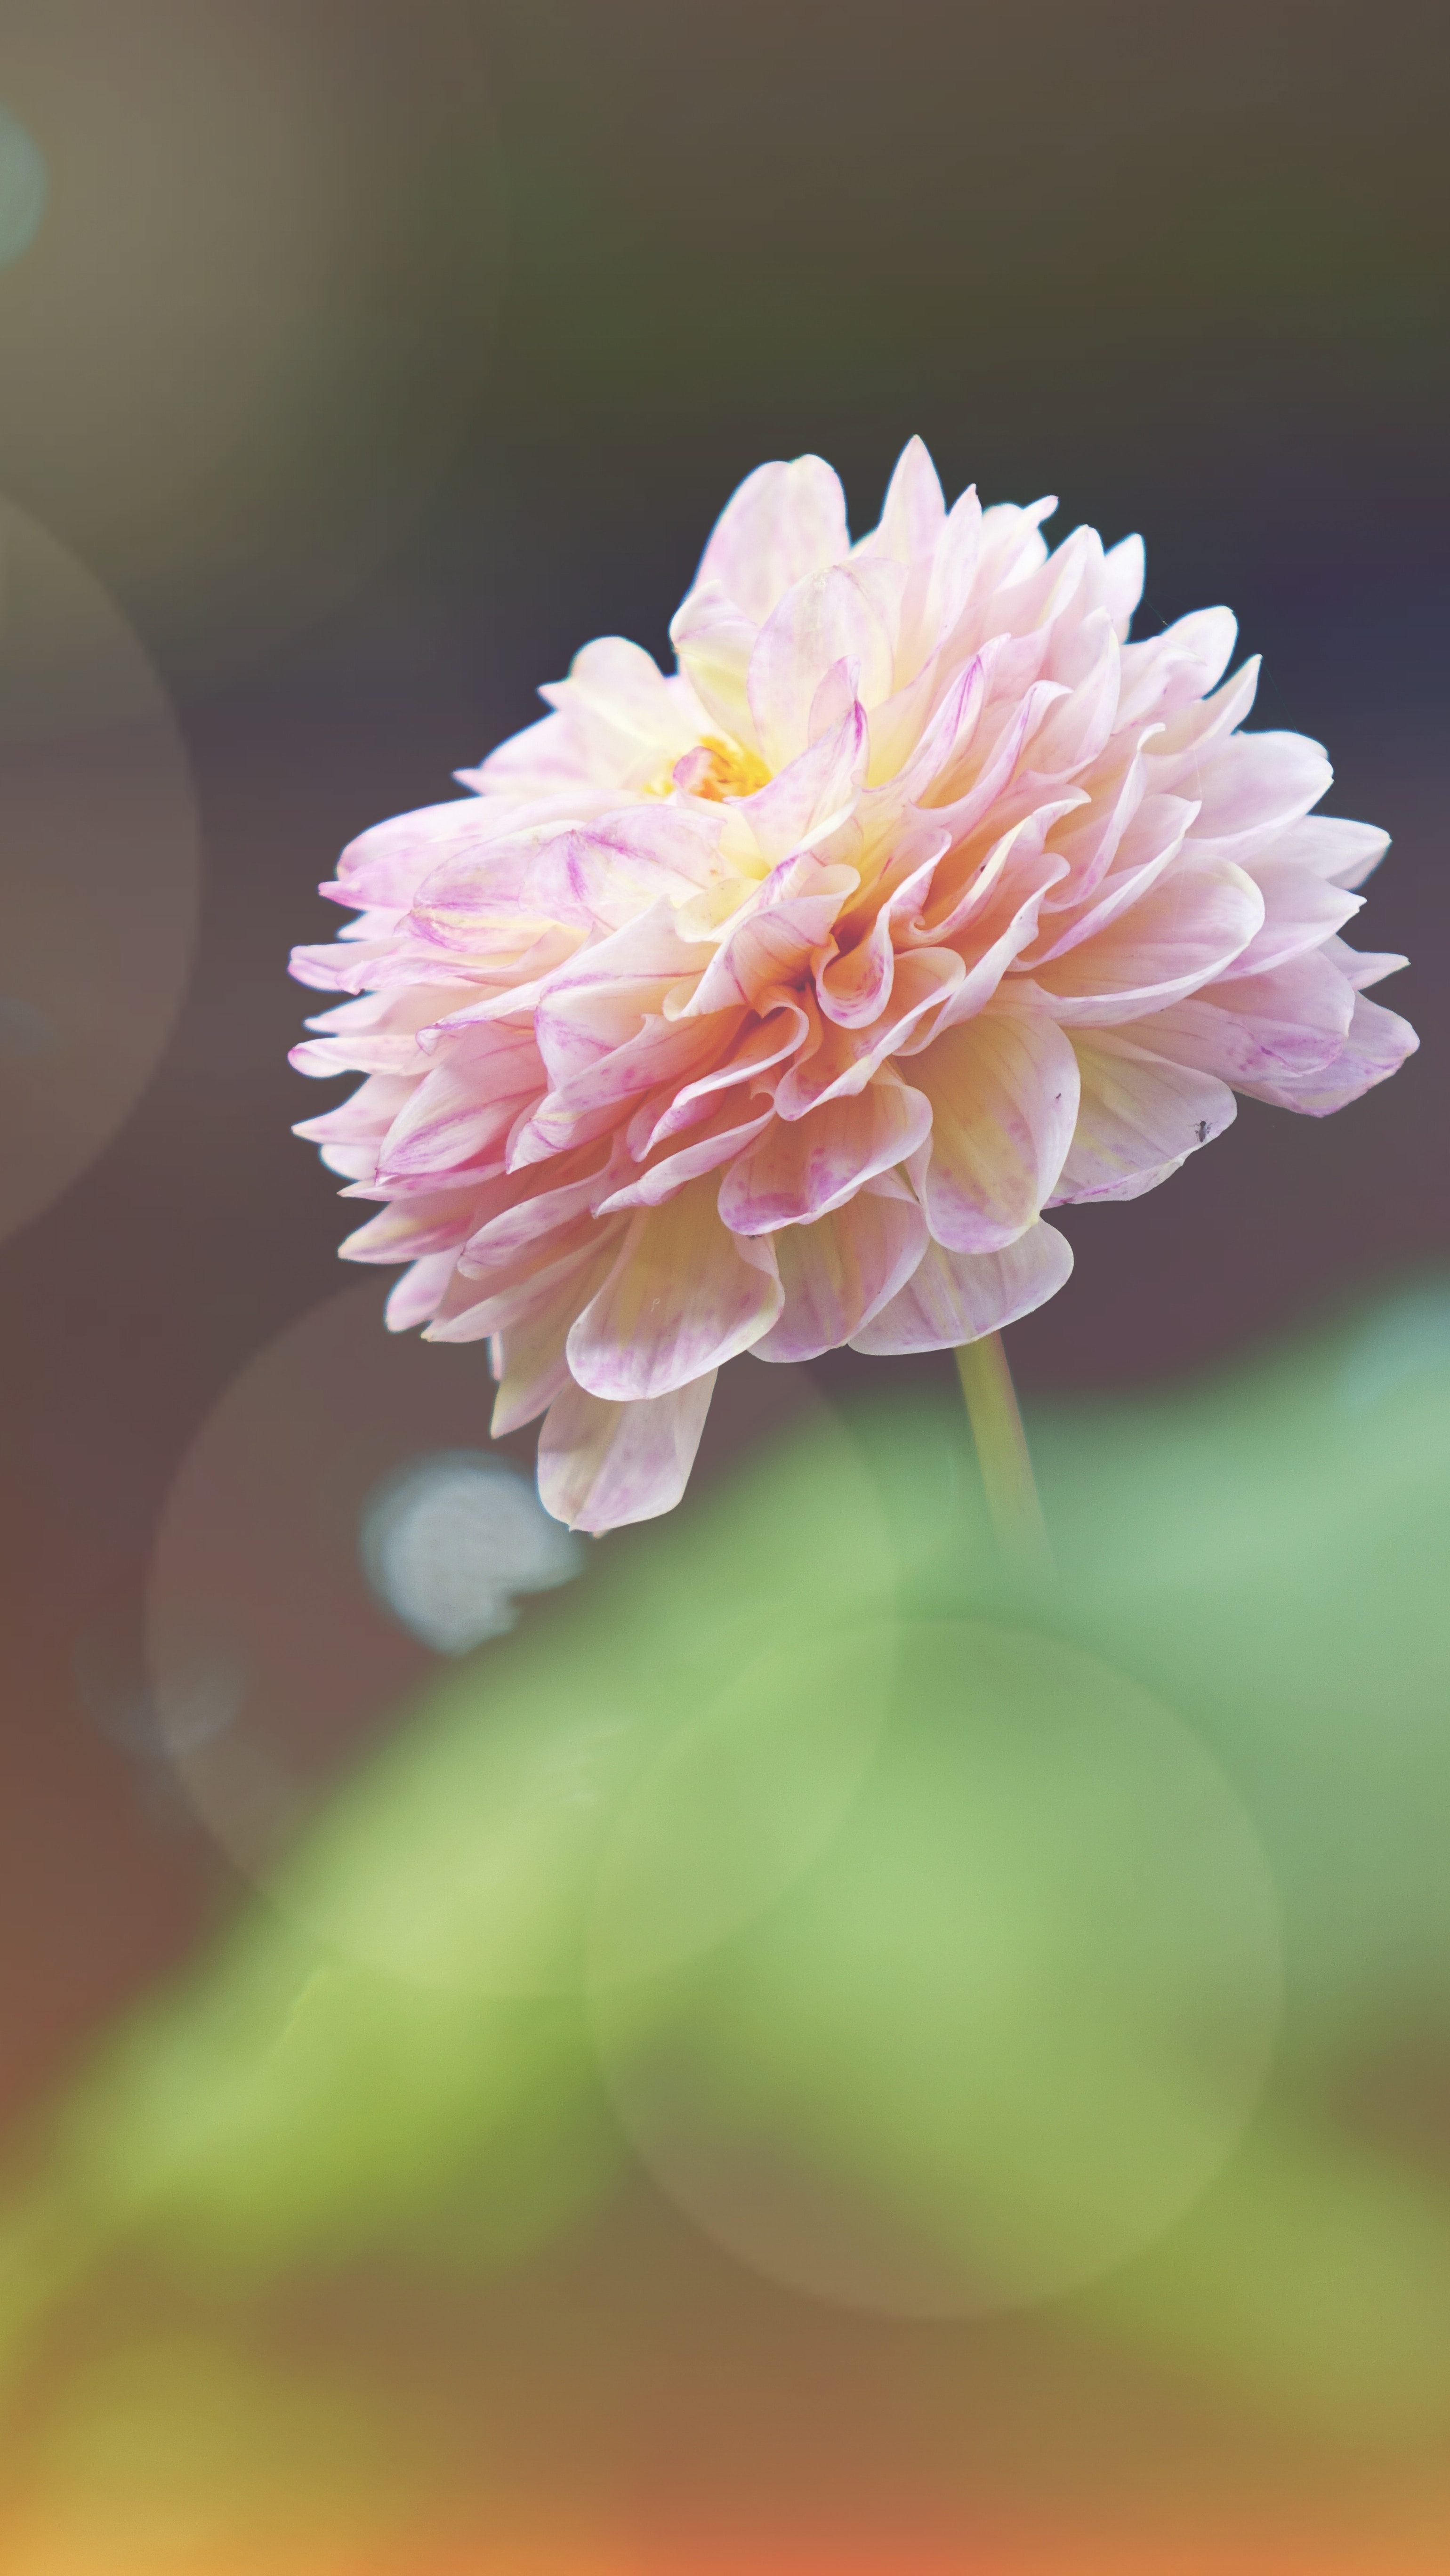 Sunlit Pink Flower Iphone Wallpaper - Flower Does Not Think Of Competing S , HD Wallpaper & Backgrounds